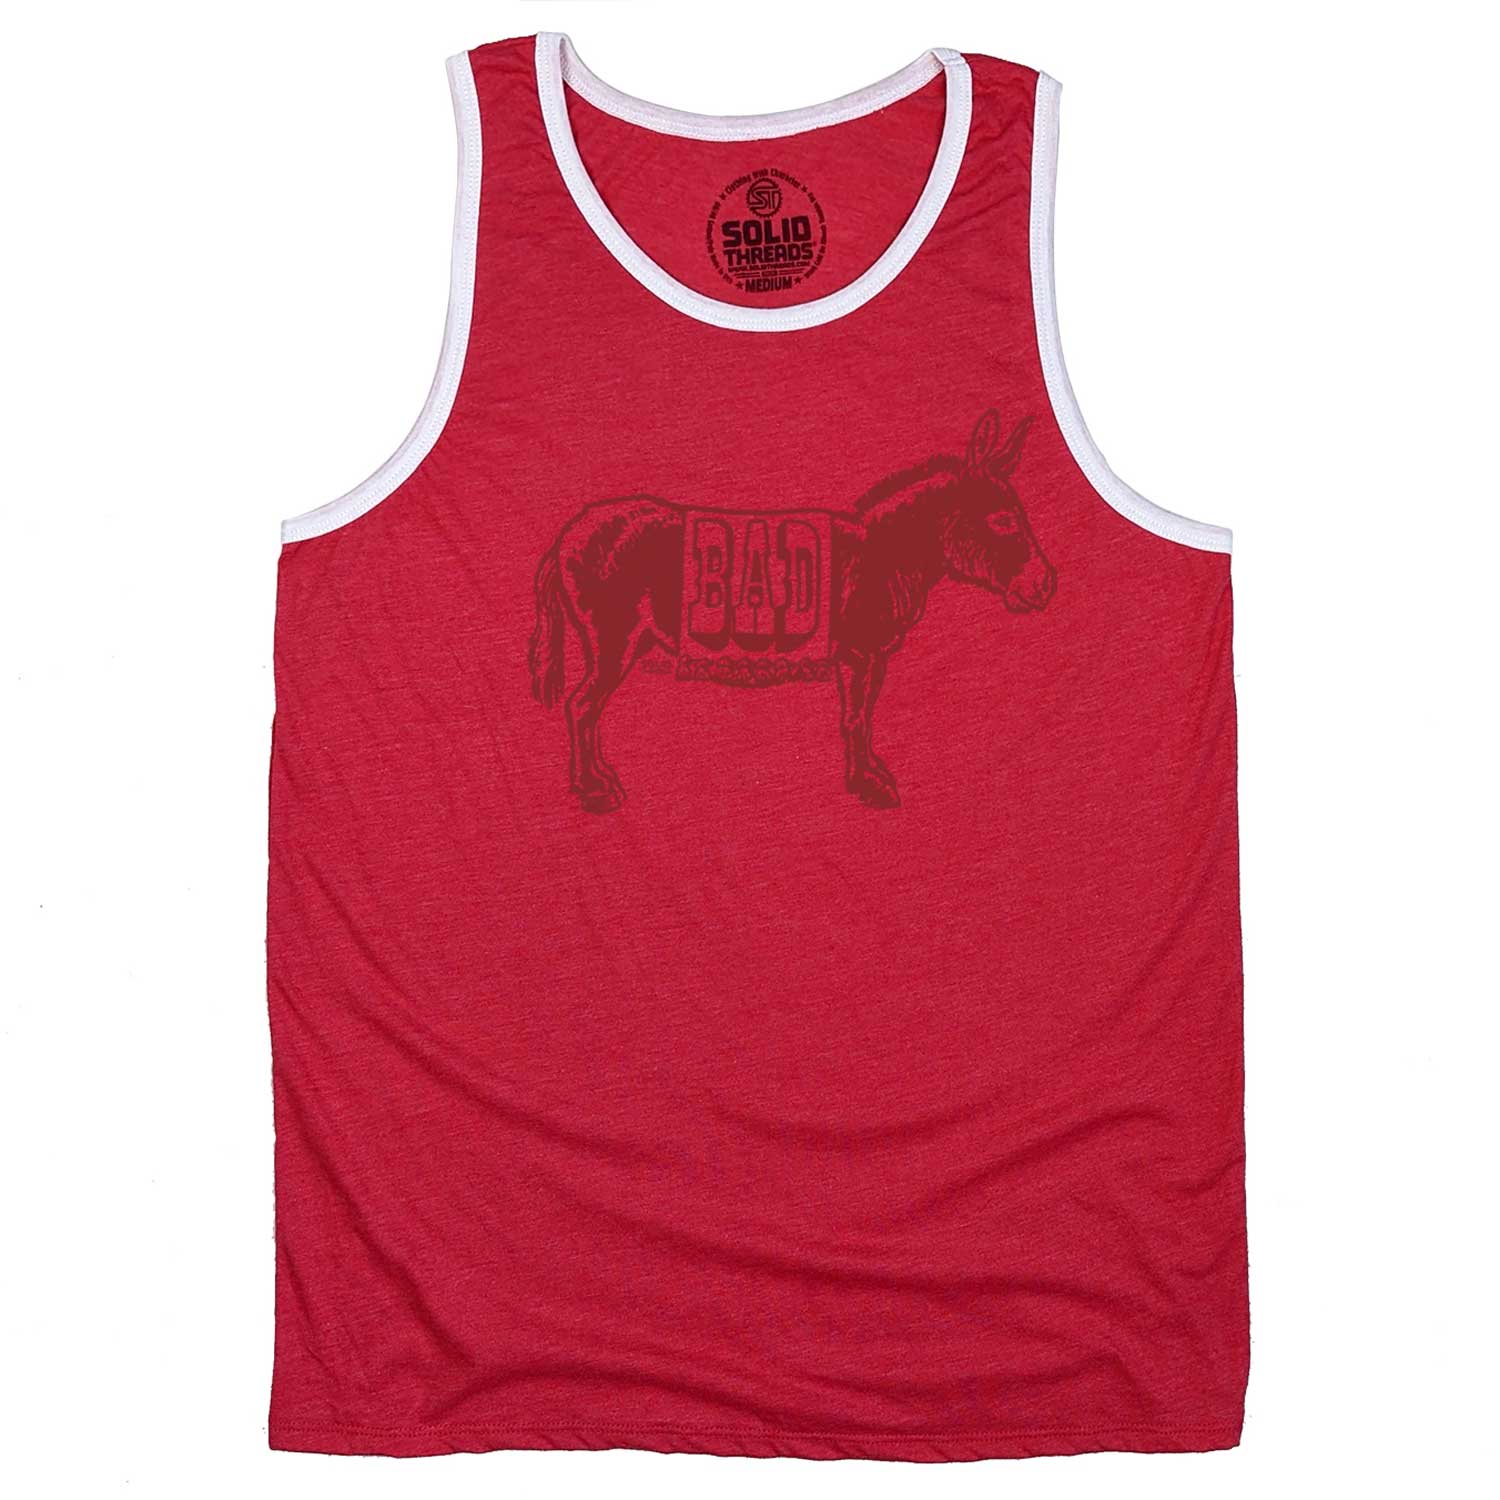 Men's Bad Ass Vintage Graphic Tank Top | Funny Donkey T-shirt | Solid Threads